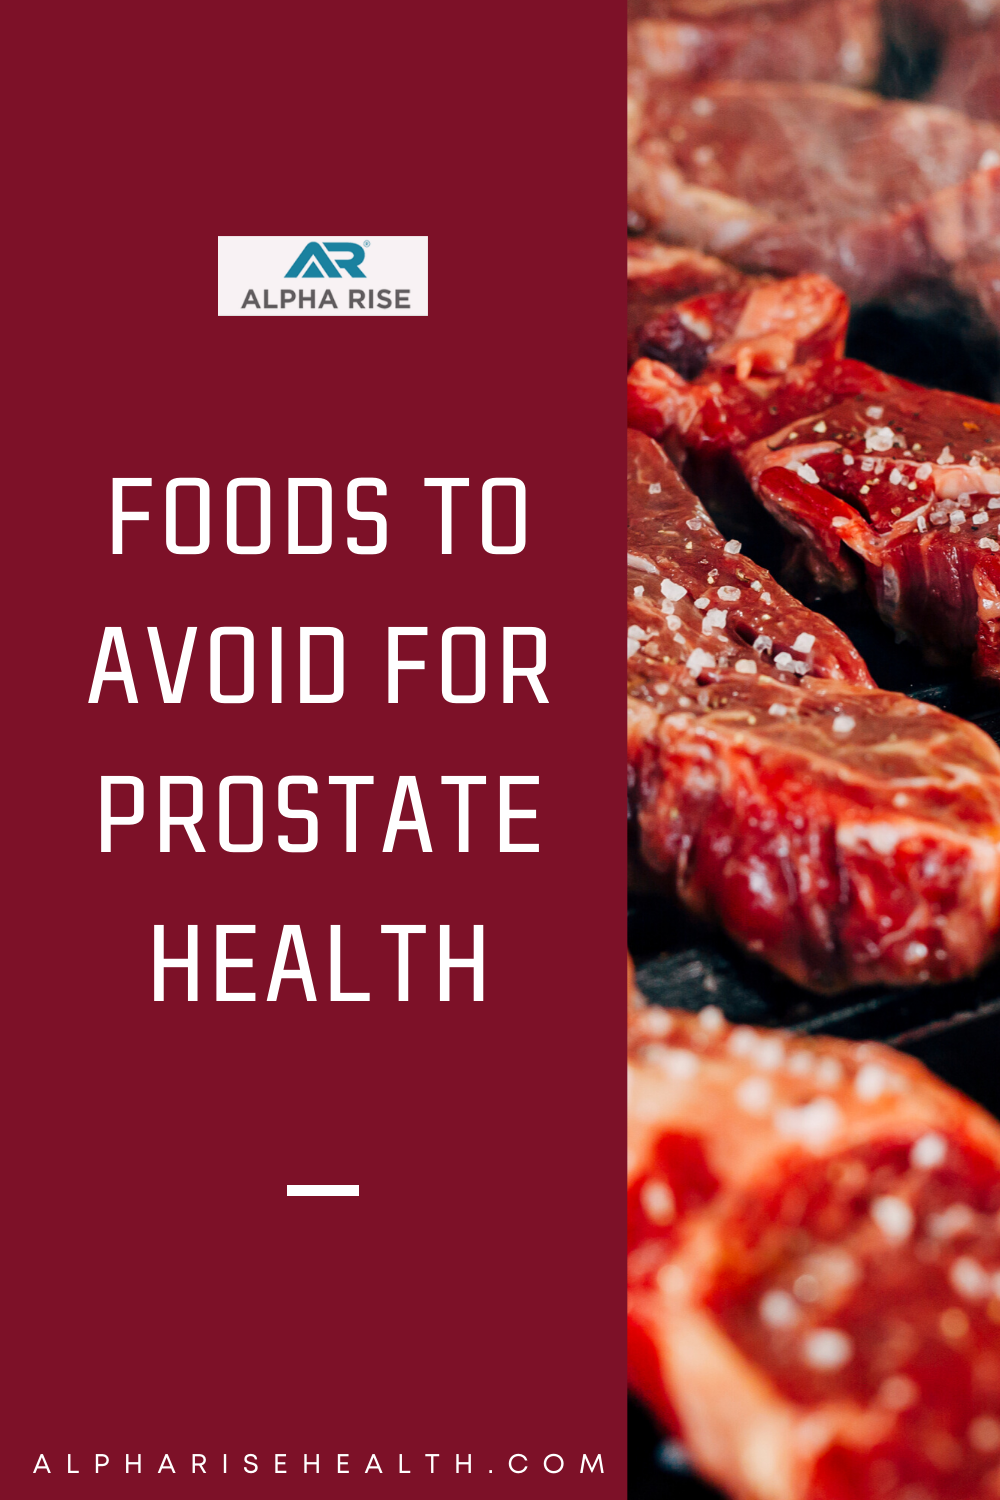 FOODS TO AVOID FOR PROSTATE HEALTH in 2020